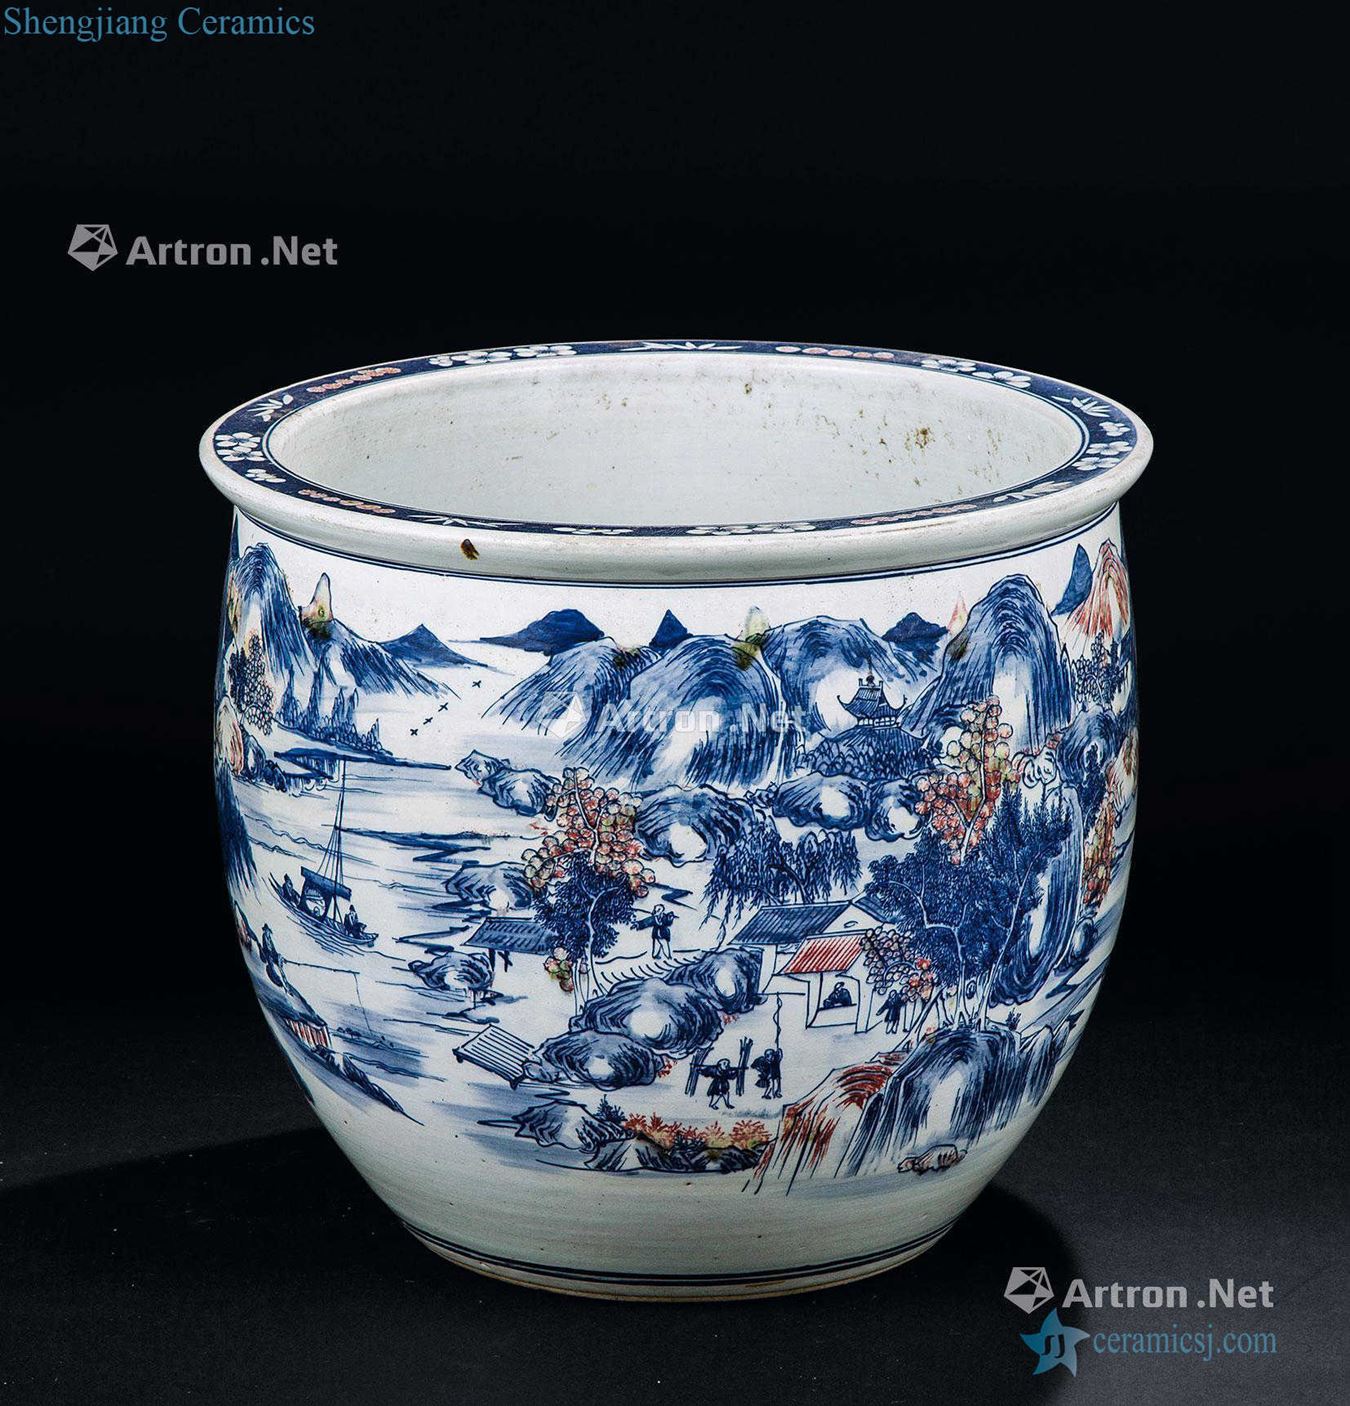 In the qing dynasty (1644-1911) blue and white lines cylinder youligong landscape characters